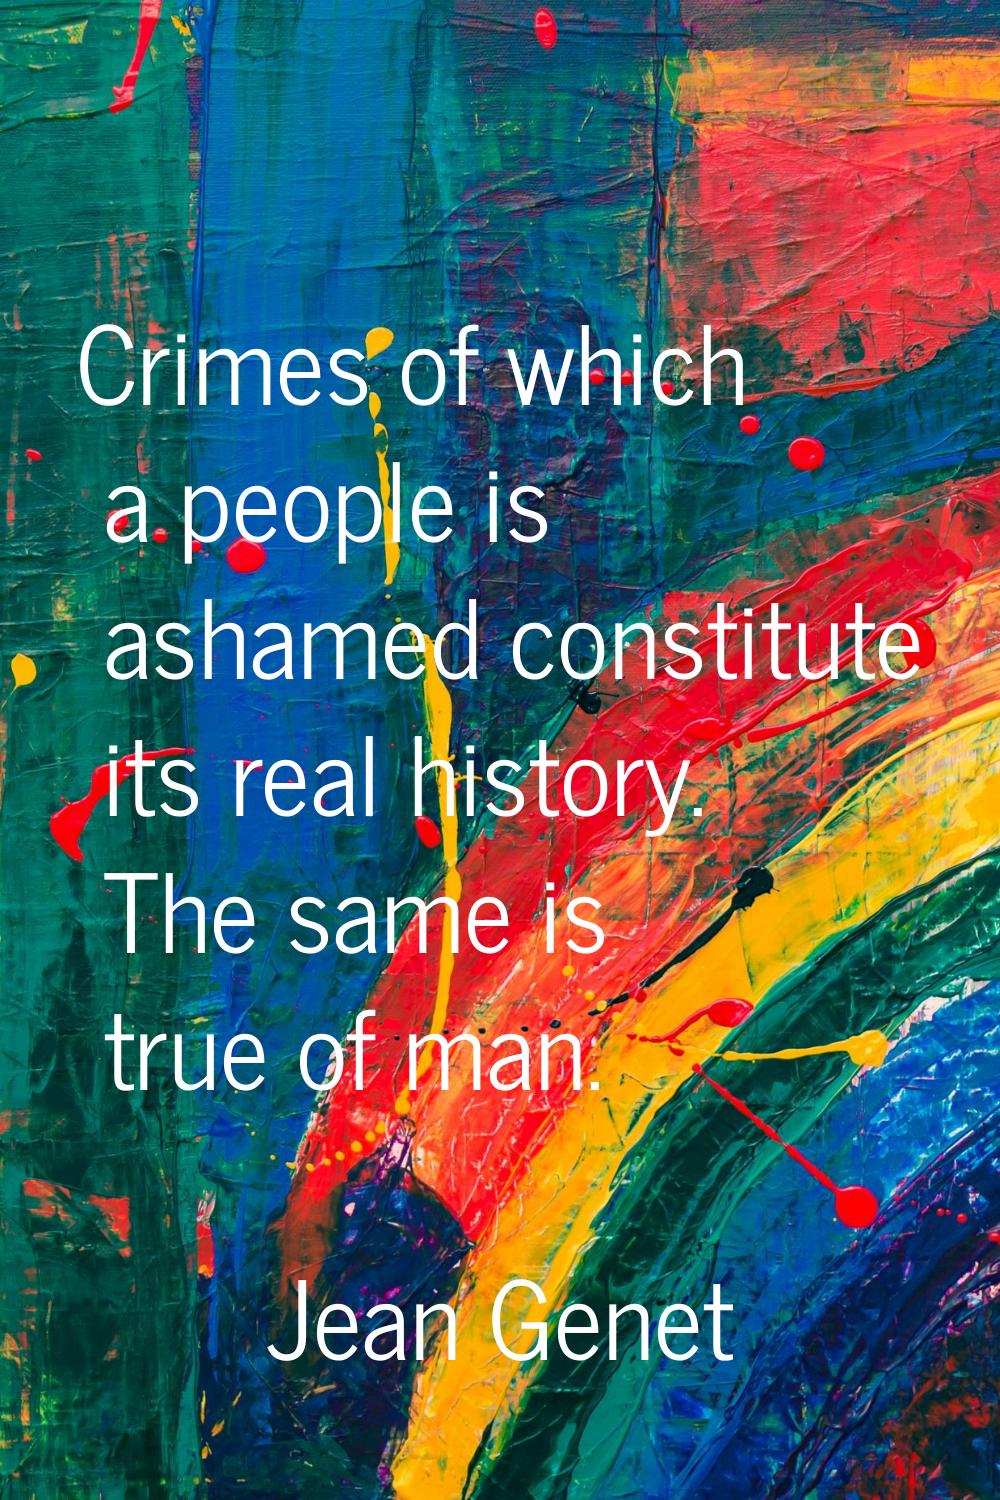 Crimes of which a people is ashamed constitute its real history. The same is true of man.